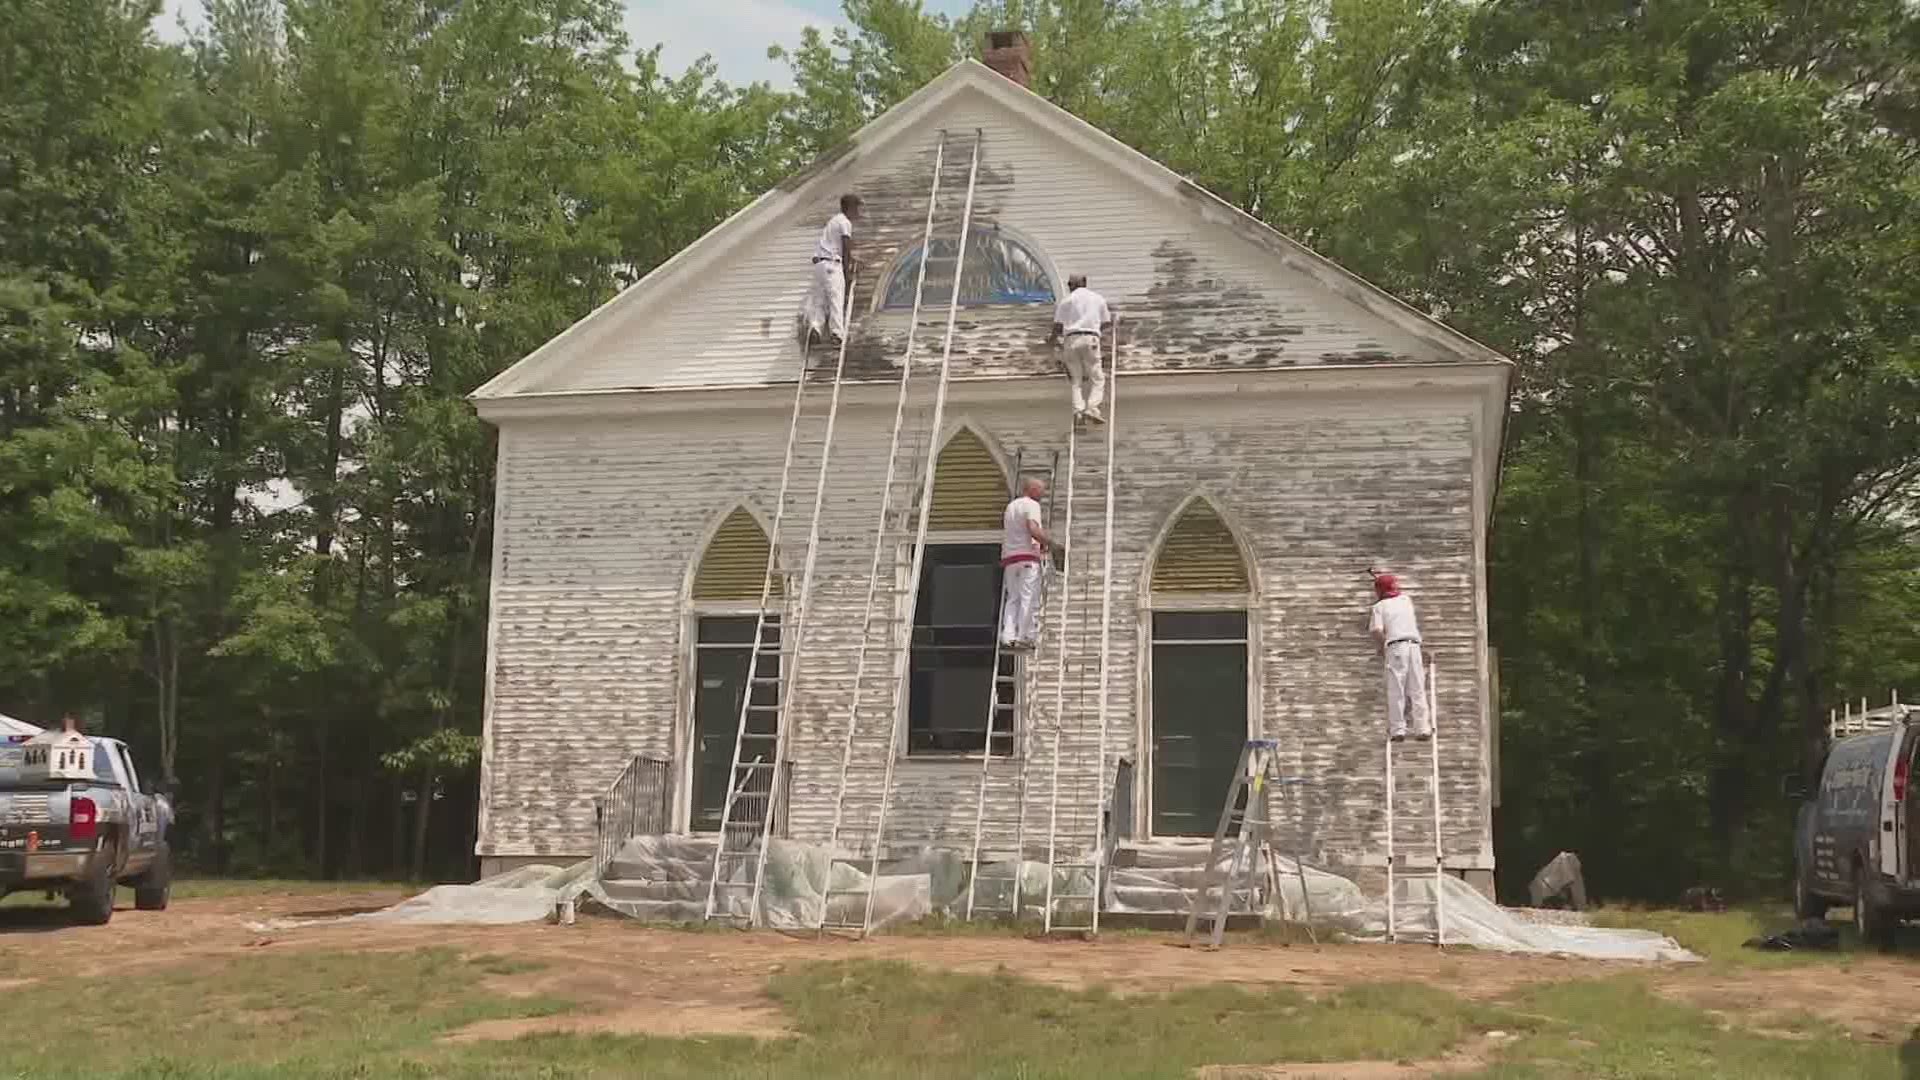 The 181-year-old church has been slowly renovated by the Bear Hill Church Restoration Group, which takes on a new project each year.